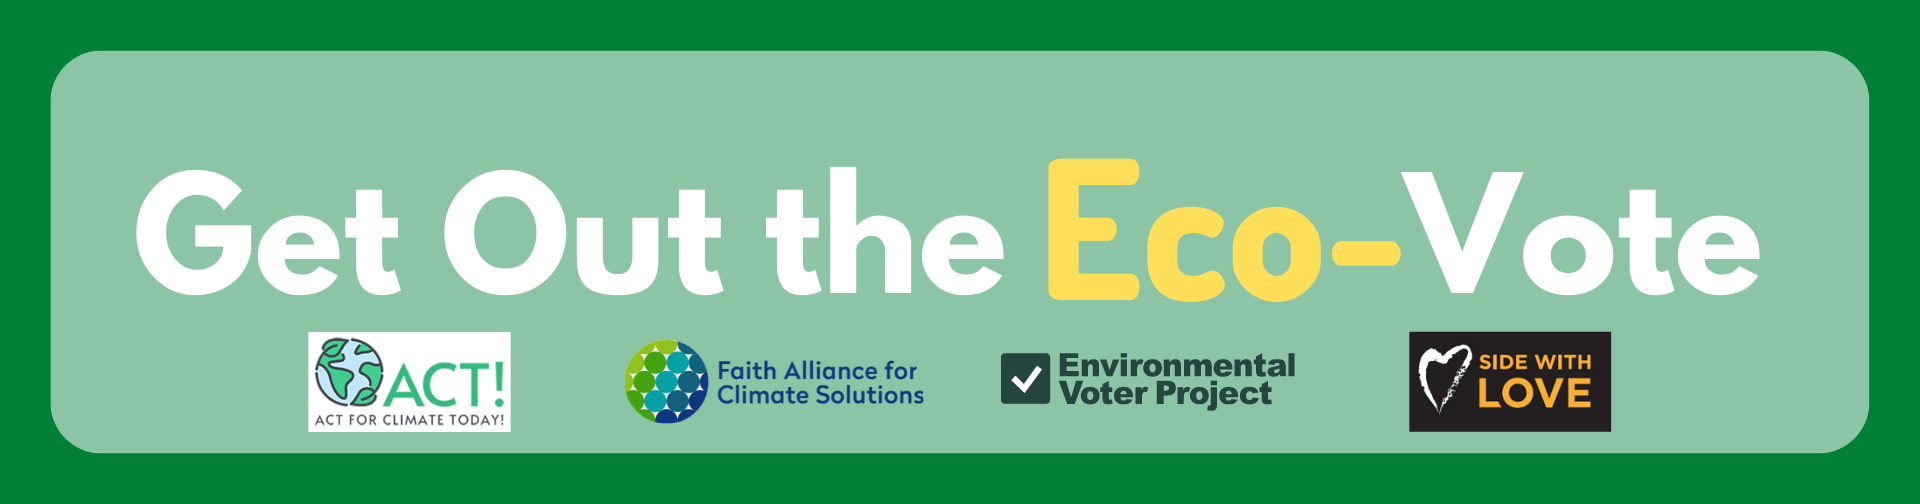 Get Out the Eco-Vote